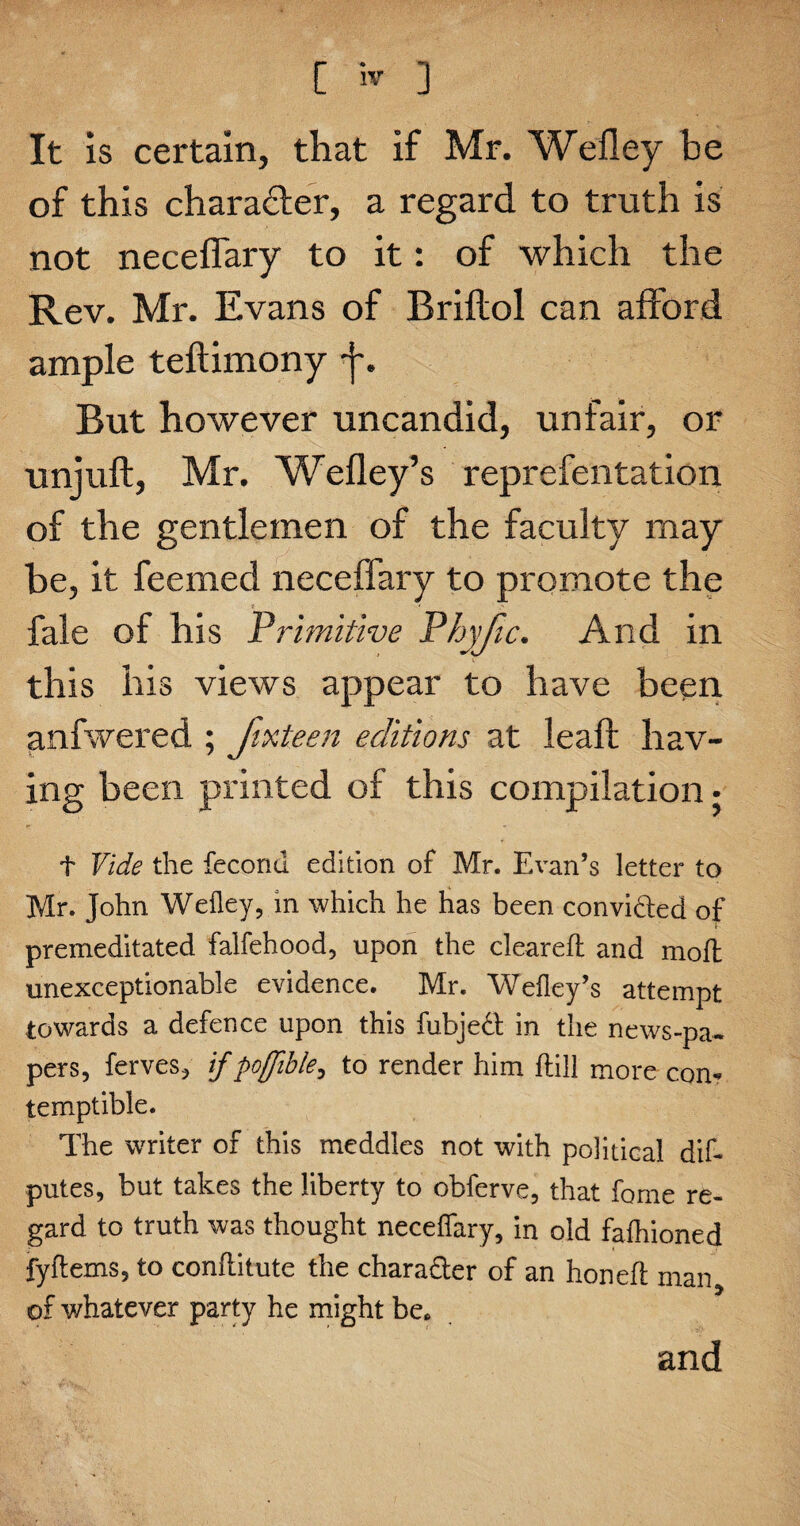 It is certain, that if Mr. Wefley be of this chara&er, a regard to truth is not neceffary to it: of which the Rev. Mr. Evans of Brillol can afford ample teflimony But however uncandid, unfair, or unjuft, Mr. Wefley’s reprefentation of the gentlemen of the faculty may be, it feemed neceffary to promote the fale of his Primitive Phyfic. And in this his views appear to have been anfwered ; fixteen editions at leaft hav¬ ing been printed of this compilation • t Vide the fecond edition of Mr. Evan’s letter to Mr. John Wefley, in which he has been convidted of ♦ premeditated falfehood, upon the cleared and mod unexceptionable evidence. Mr. Wefley’s attempt towards a defence upon this fubjedt in the news-pa¬ pers, ferves, if poffible, to render him dill more con¬ temptible. The writer of this meddles not with political did putes, but takes the liberty to obferve, that feme re¬ gard to truth was thought neceffary, in old fafluoned fydems, to conditute the character of an honed man of whatever party he might be. and